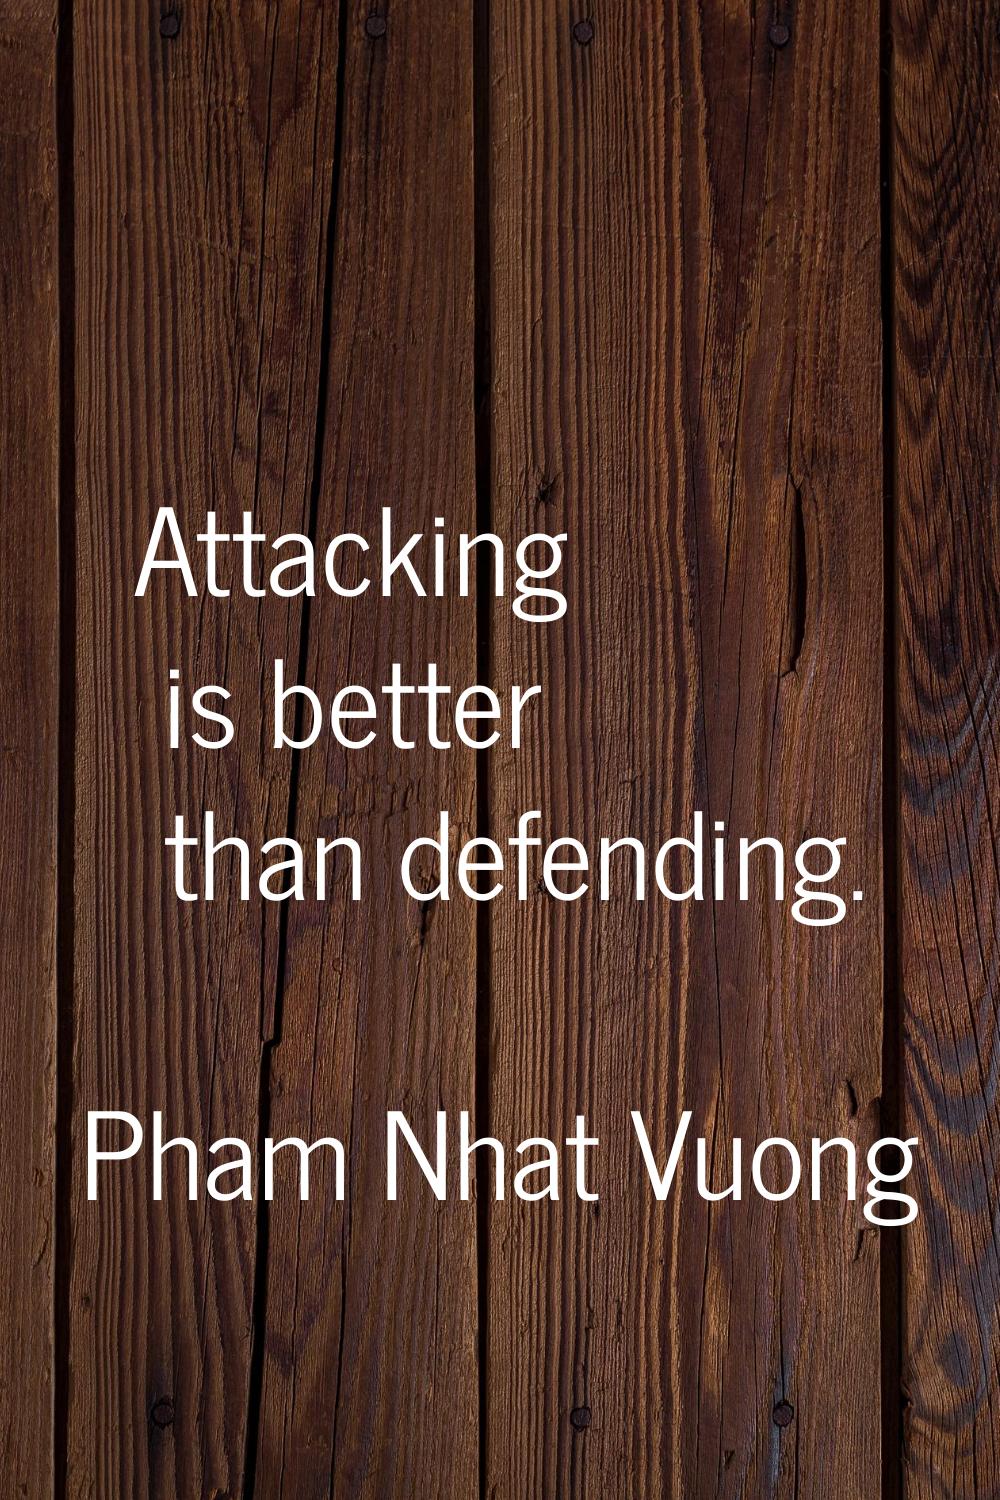 Attacking is better than defending.